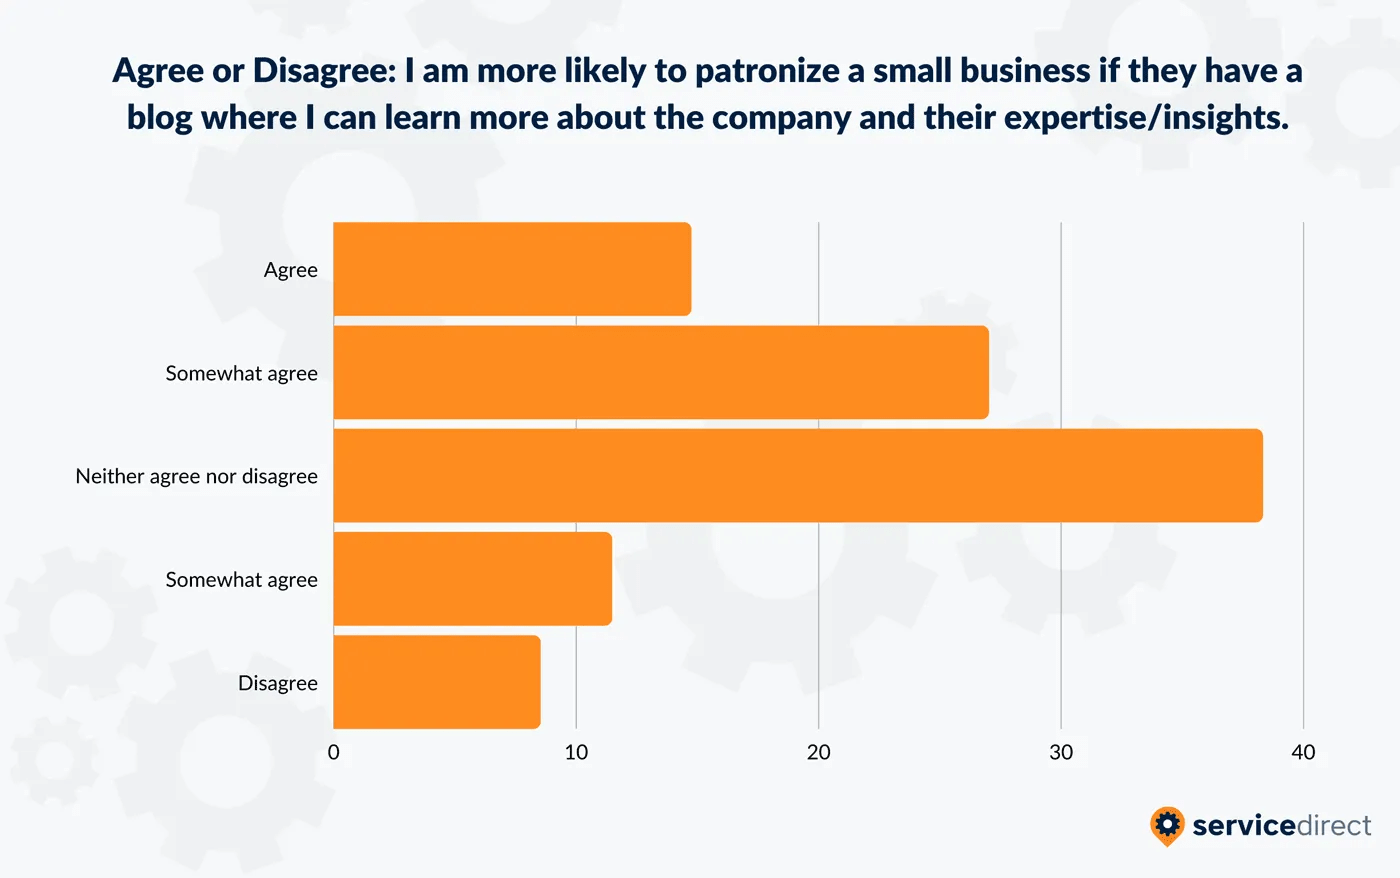 Importance-of-Blog-Content-When-Patronizing-Small-Business